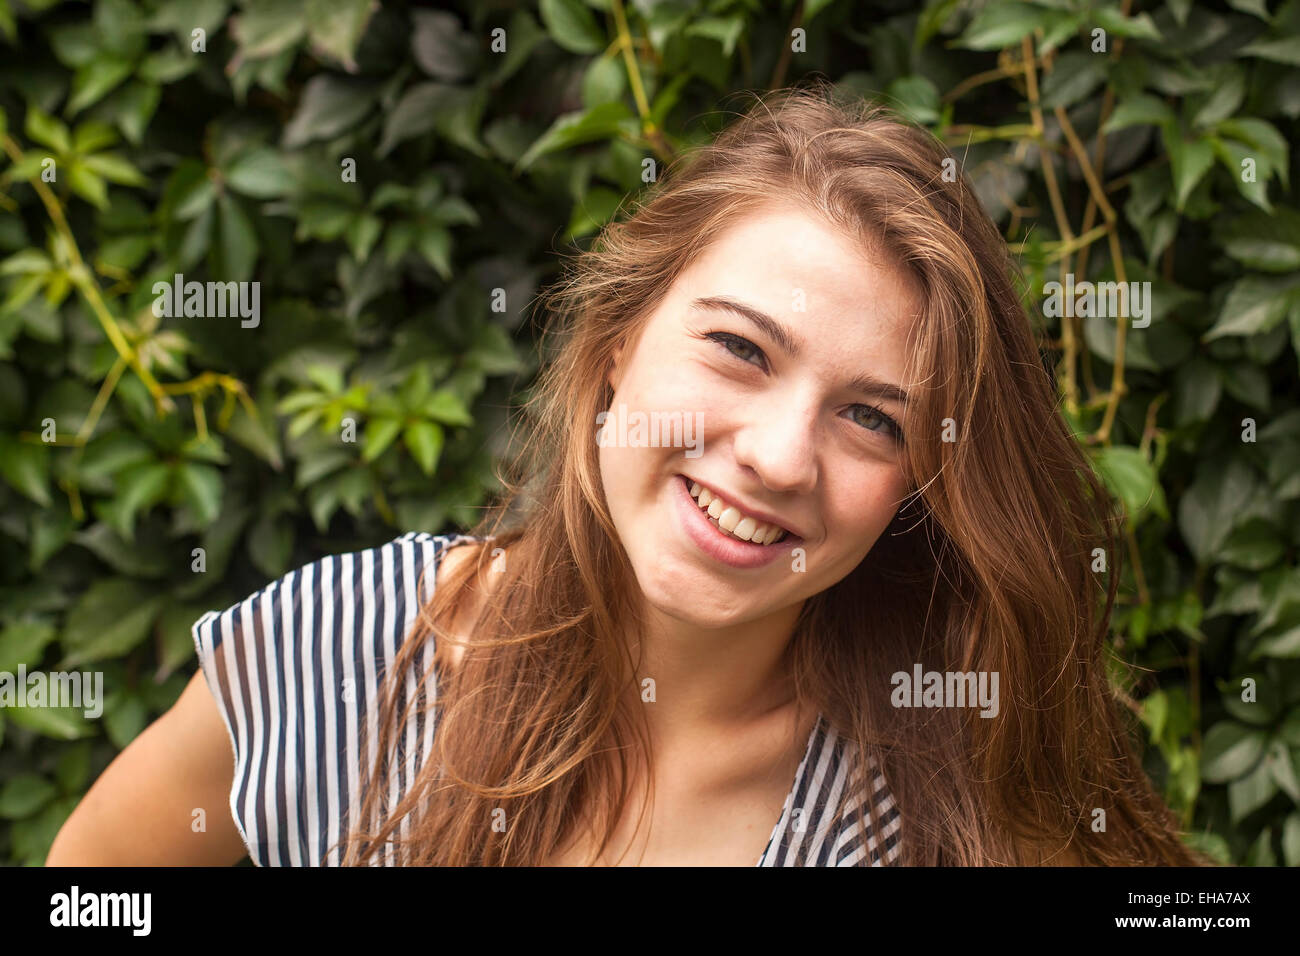 Portrait of a young pretty girl in the park. Stock Photo